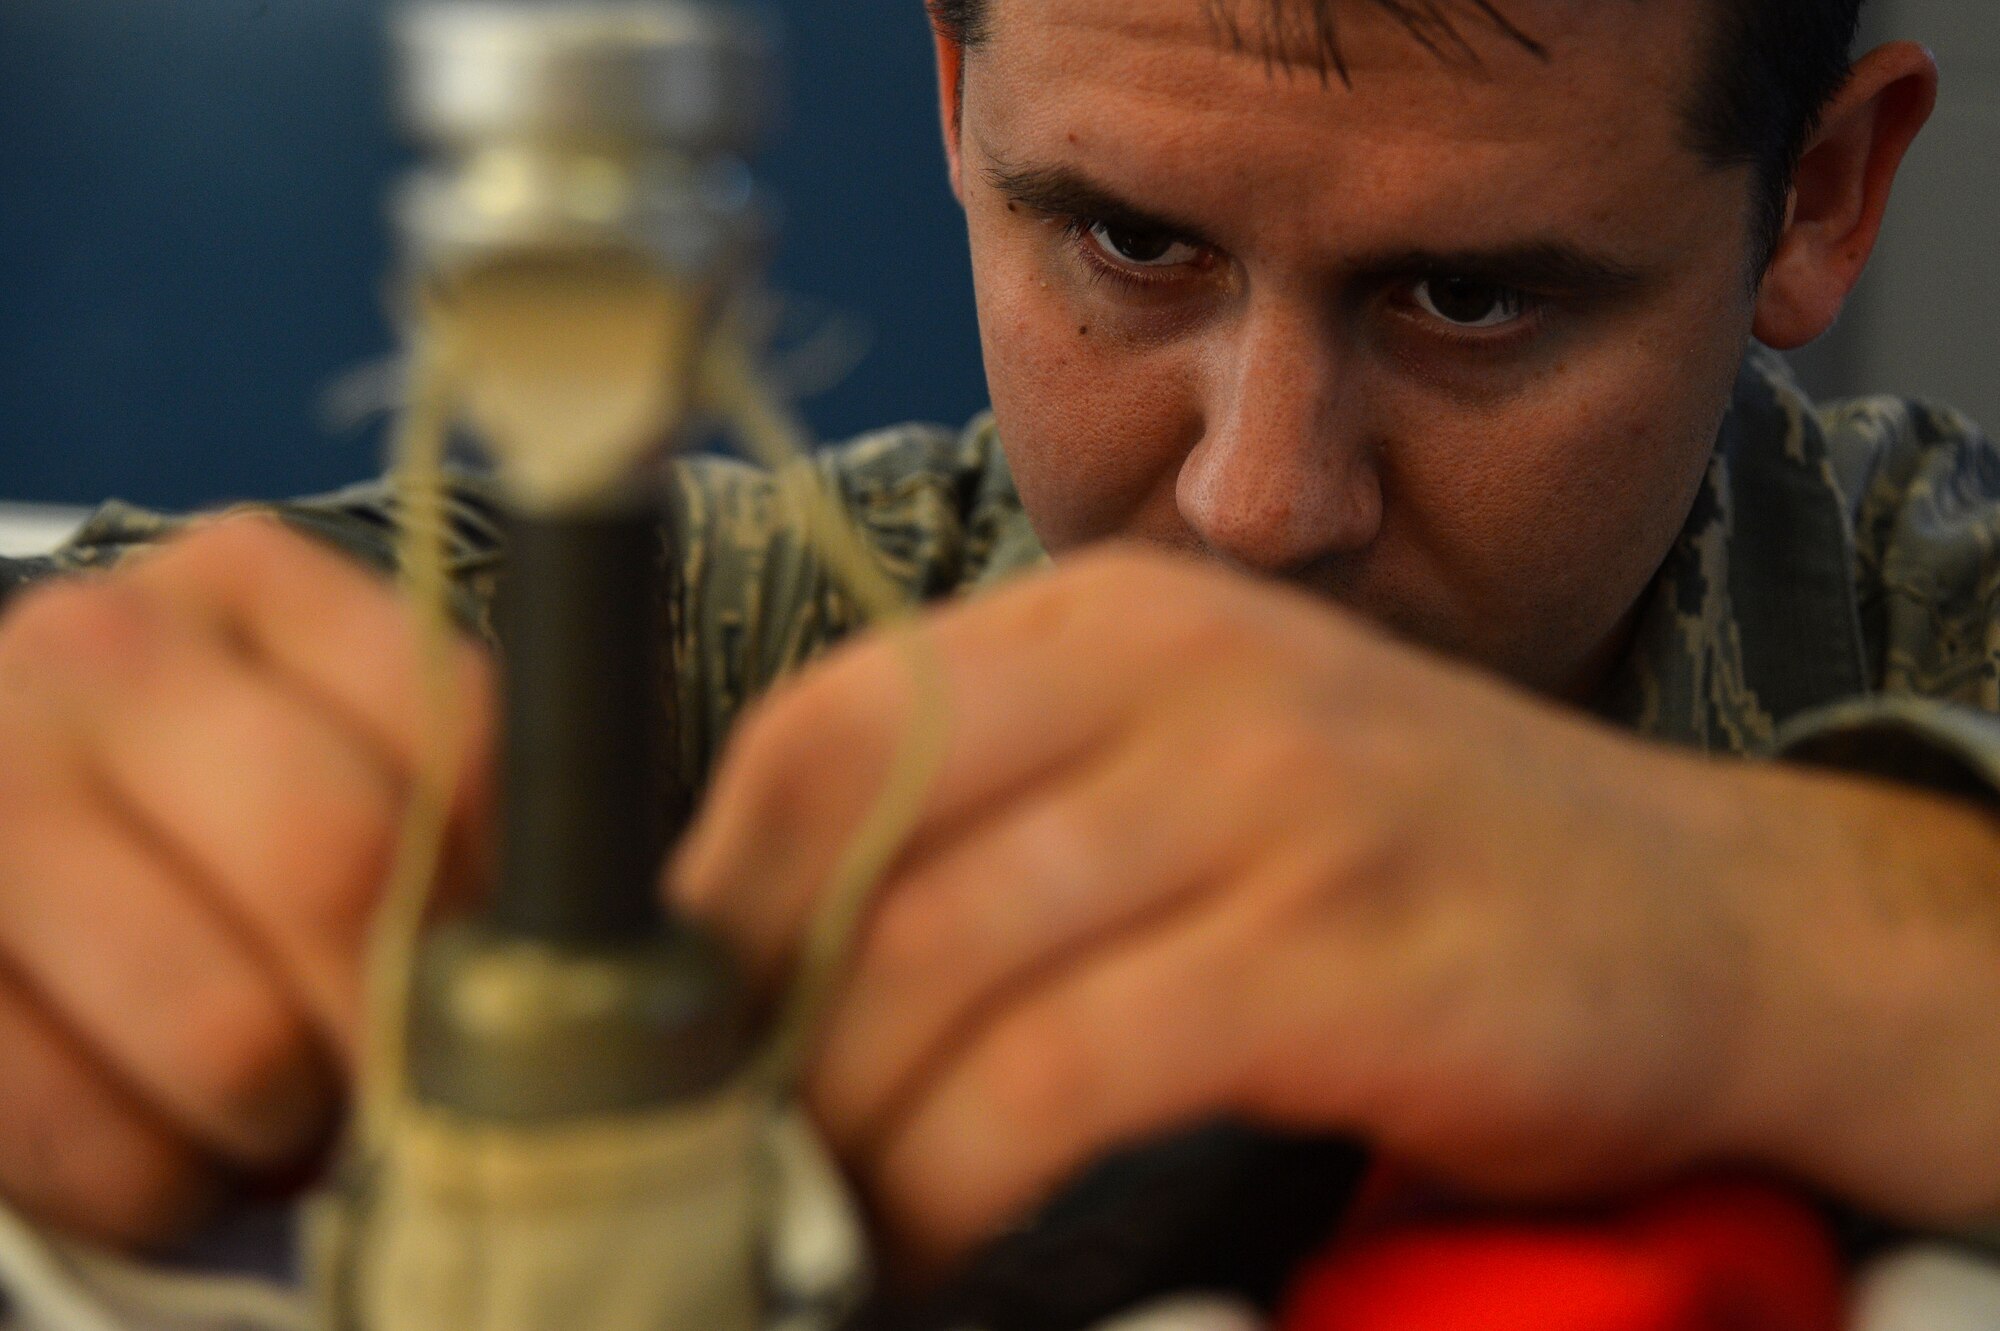 U.S. Air Force Senior Airman Kyle Burroughs, 20th Operations Support Squadron aircrew flight equipment specialist, secures a back-up firing lanyard to a mortar tube sleeve at Shaw Air Force Base, S.C., Oct. 20, 2015. The firing lanyards ensure proper deployment of the parachute canopy. (U.S. Air Force photo by Senior Airman Michael Cossaboom)